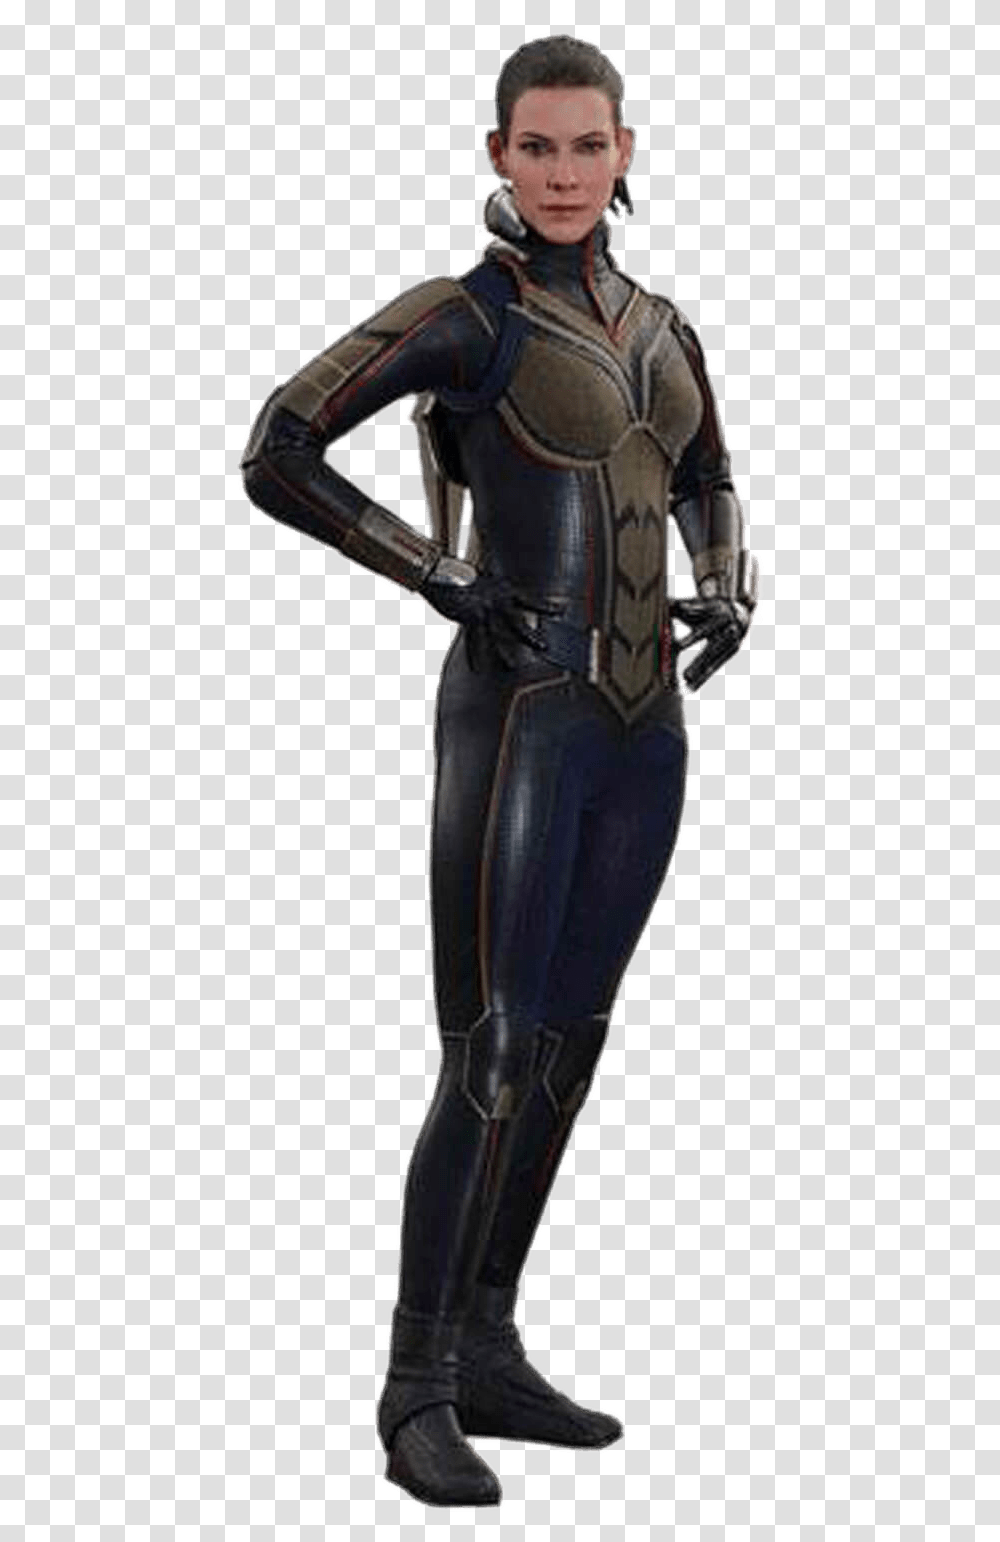 The Wasp Without Mask Wasp Ant Man And The Wasp Movie, Person, Cape, Costume Transparent Png